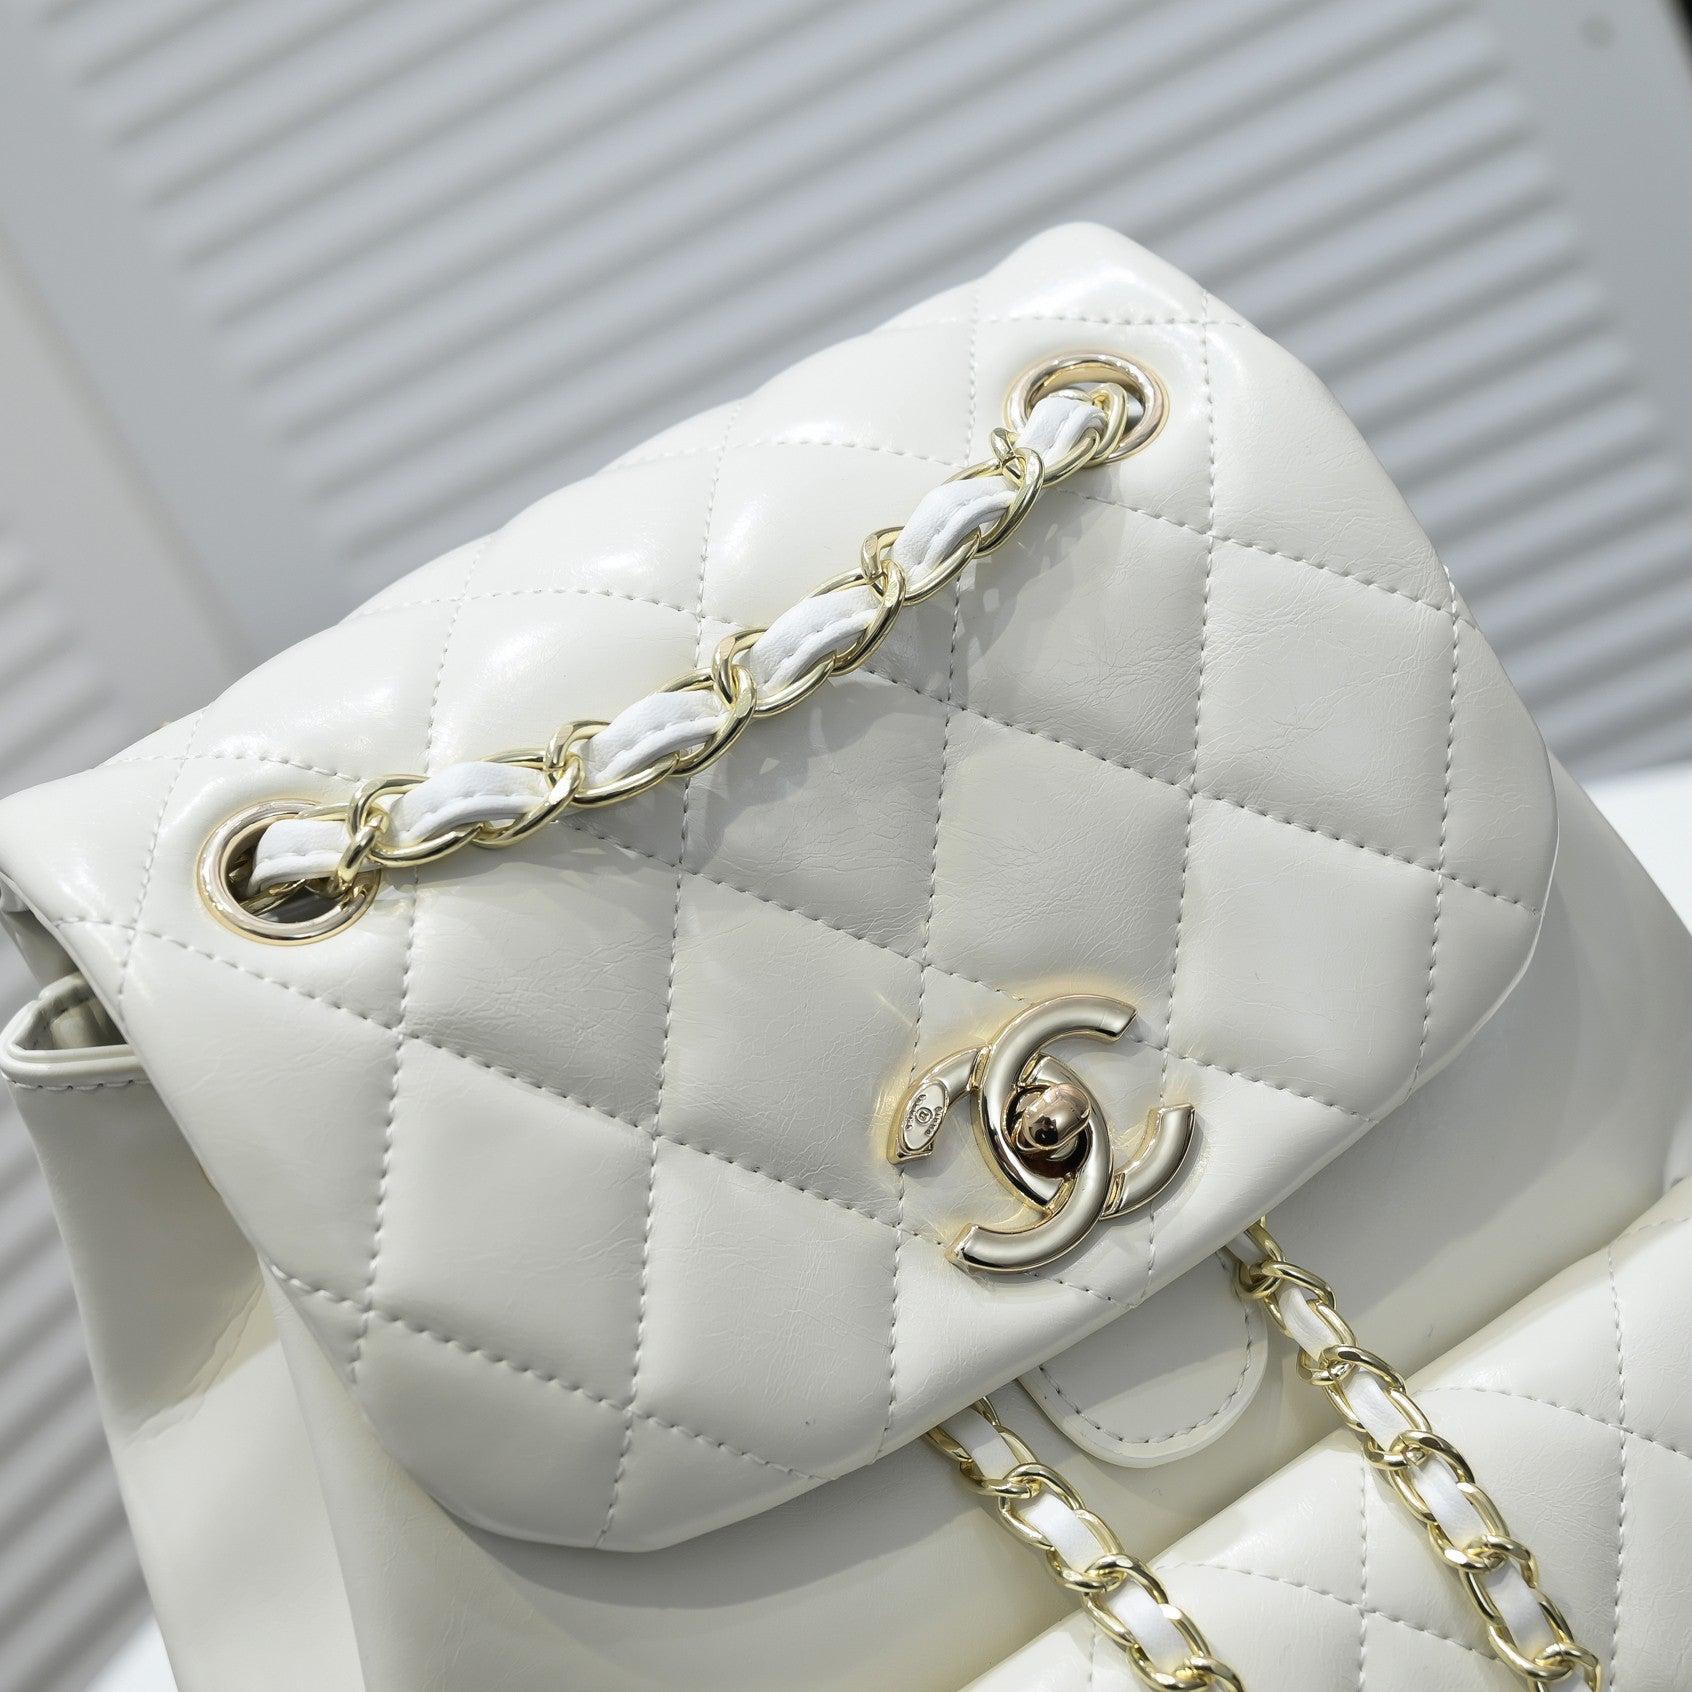 Chanel CAVIAR AFFINITY BACKPACK replica